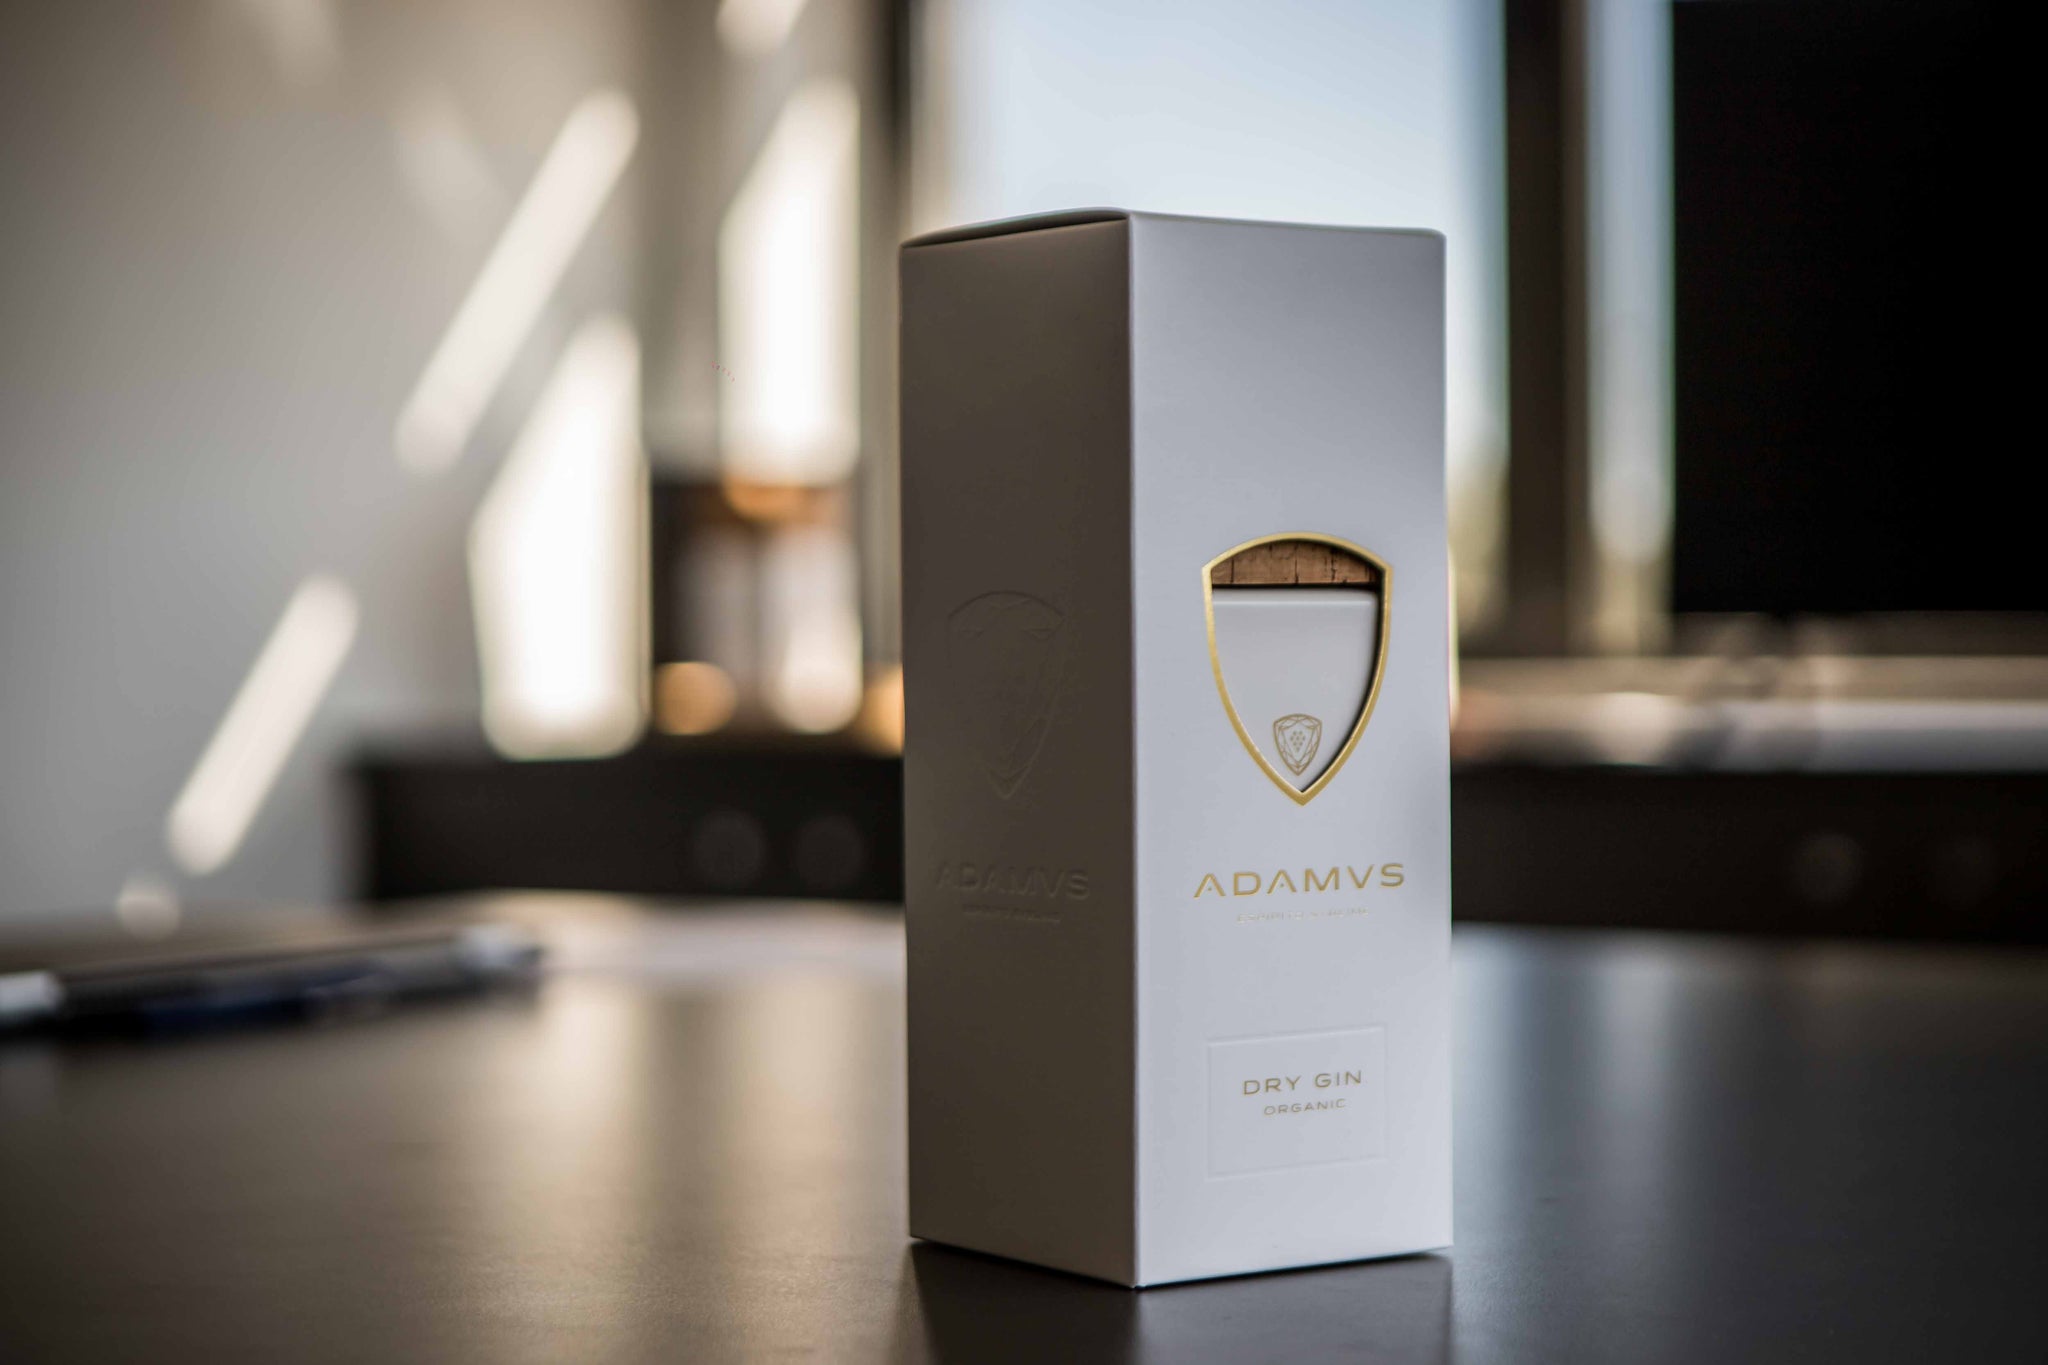 The reflection of the sublime spirit of Adamus in the new packaging